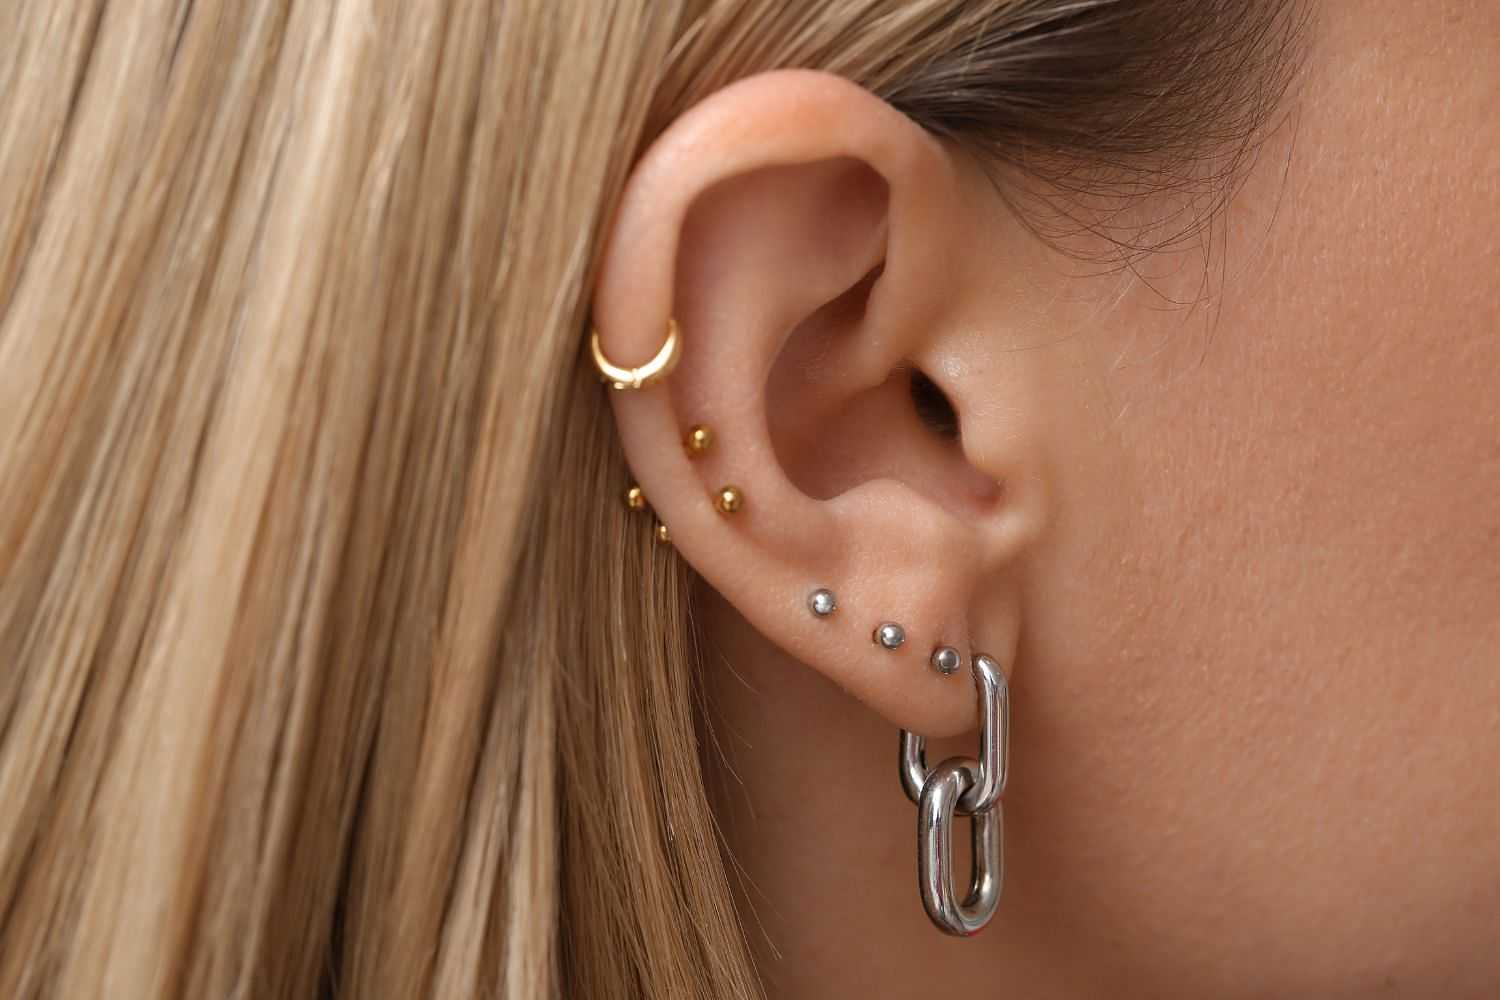 Close-up of an ear with multiple gold and silver piercings, including studs and hoops.